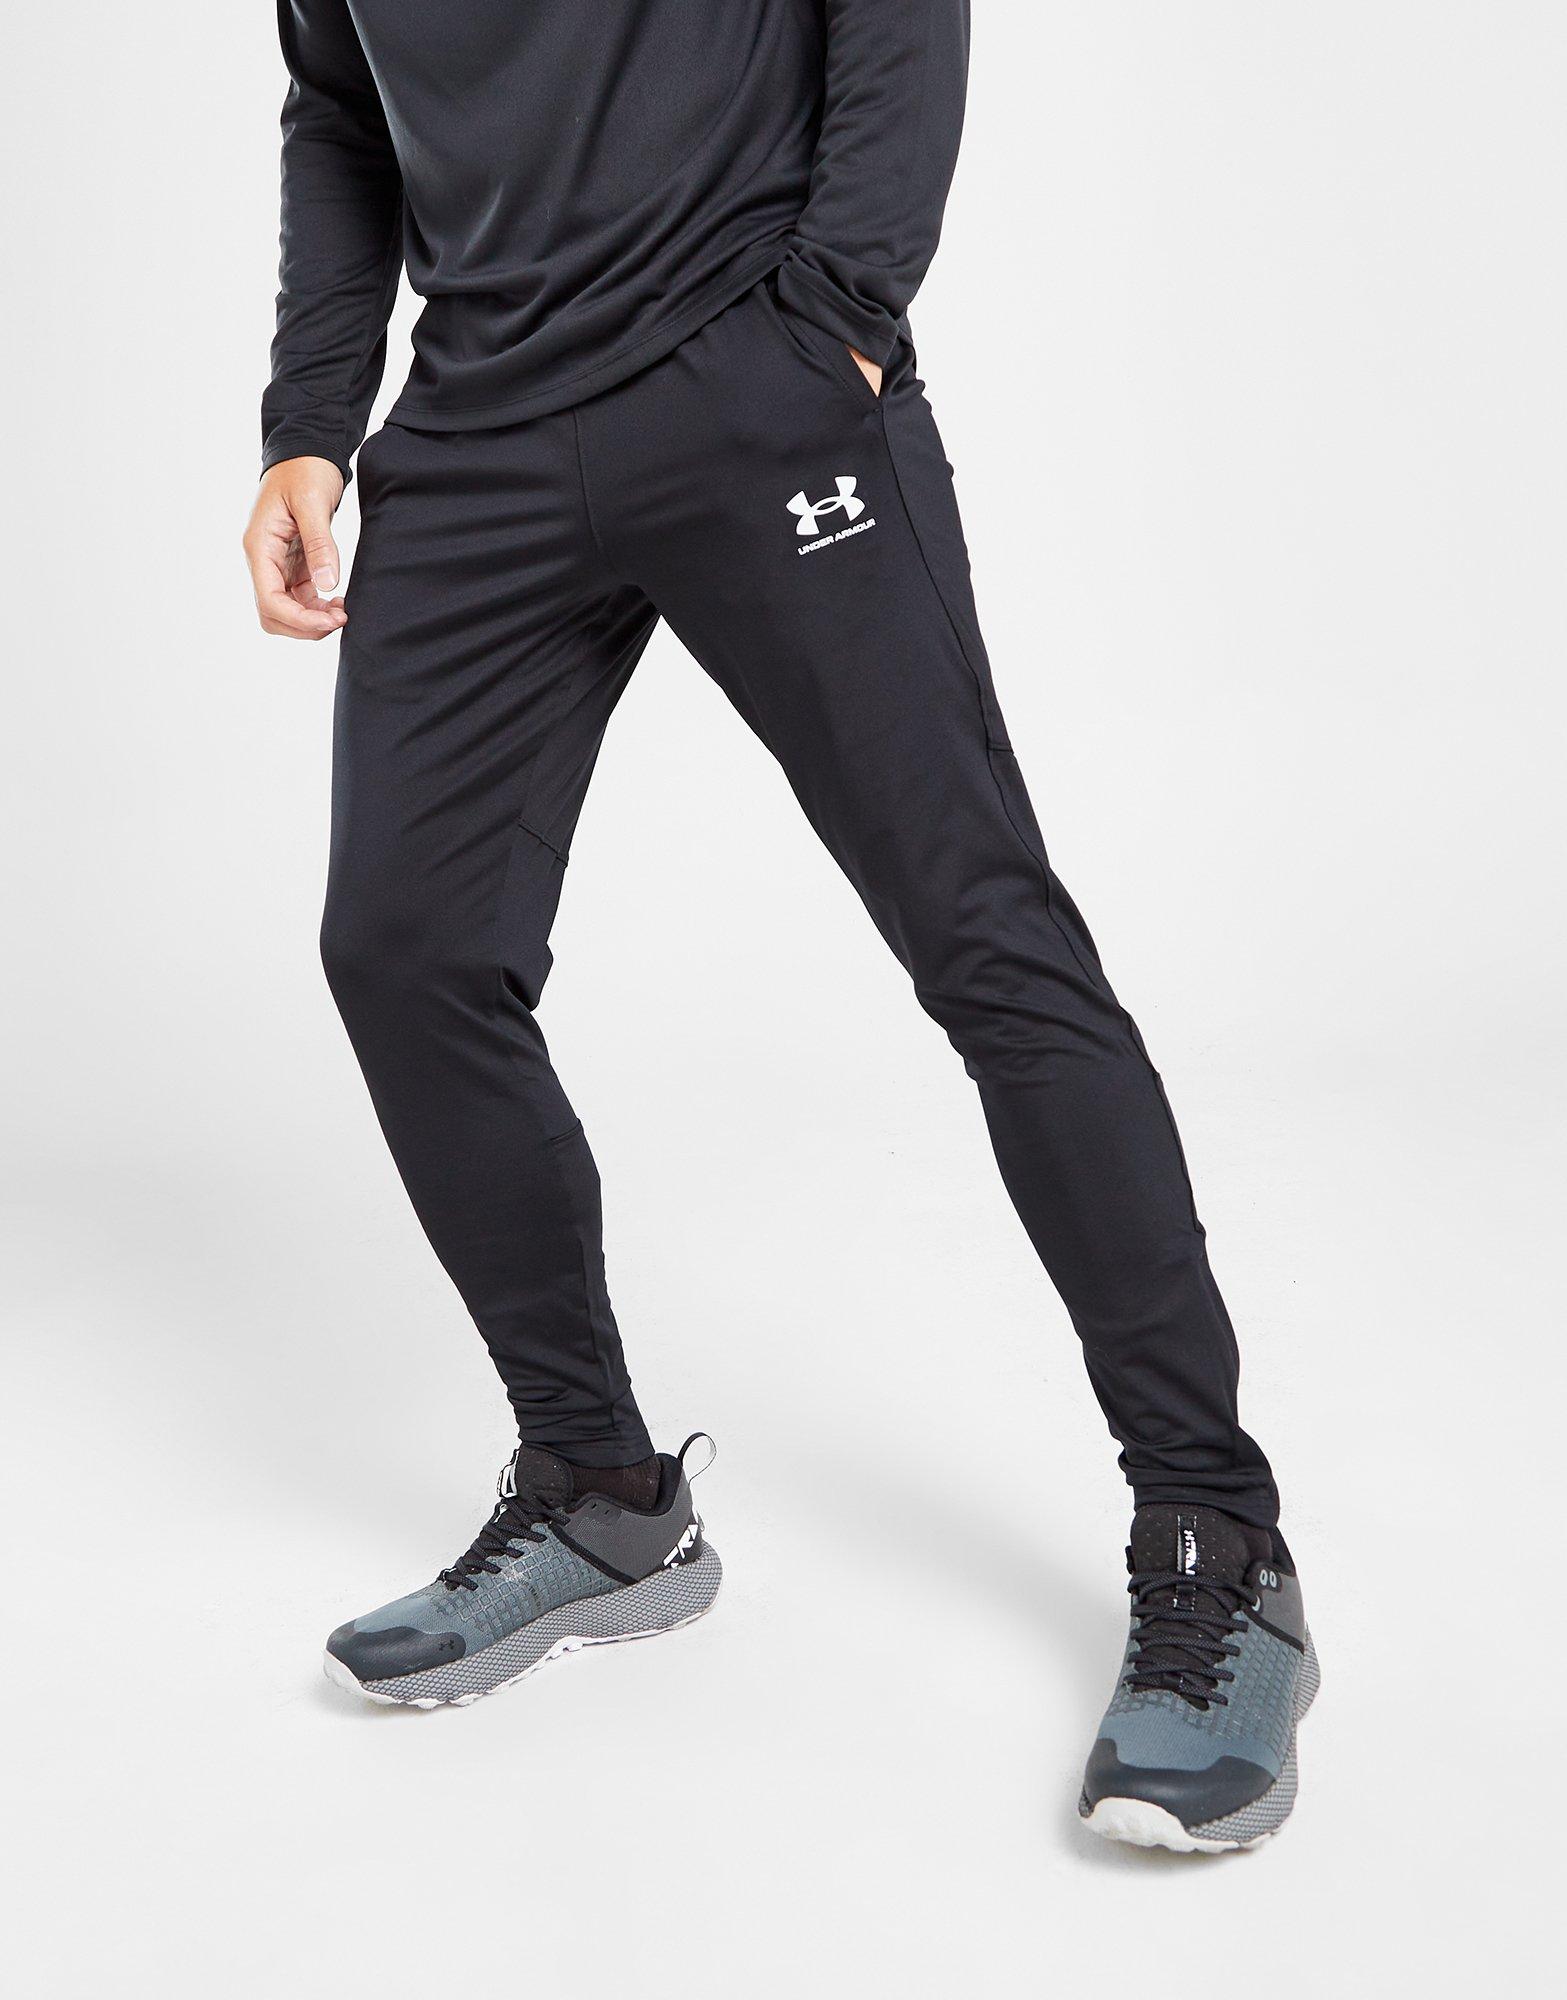 Under Armour Challenger 2.0 Track Pants